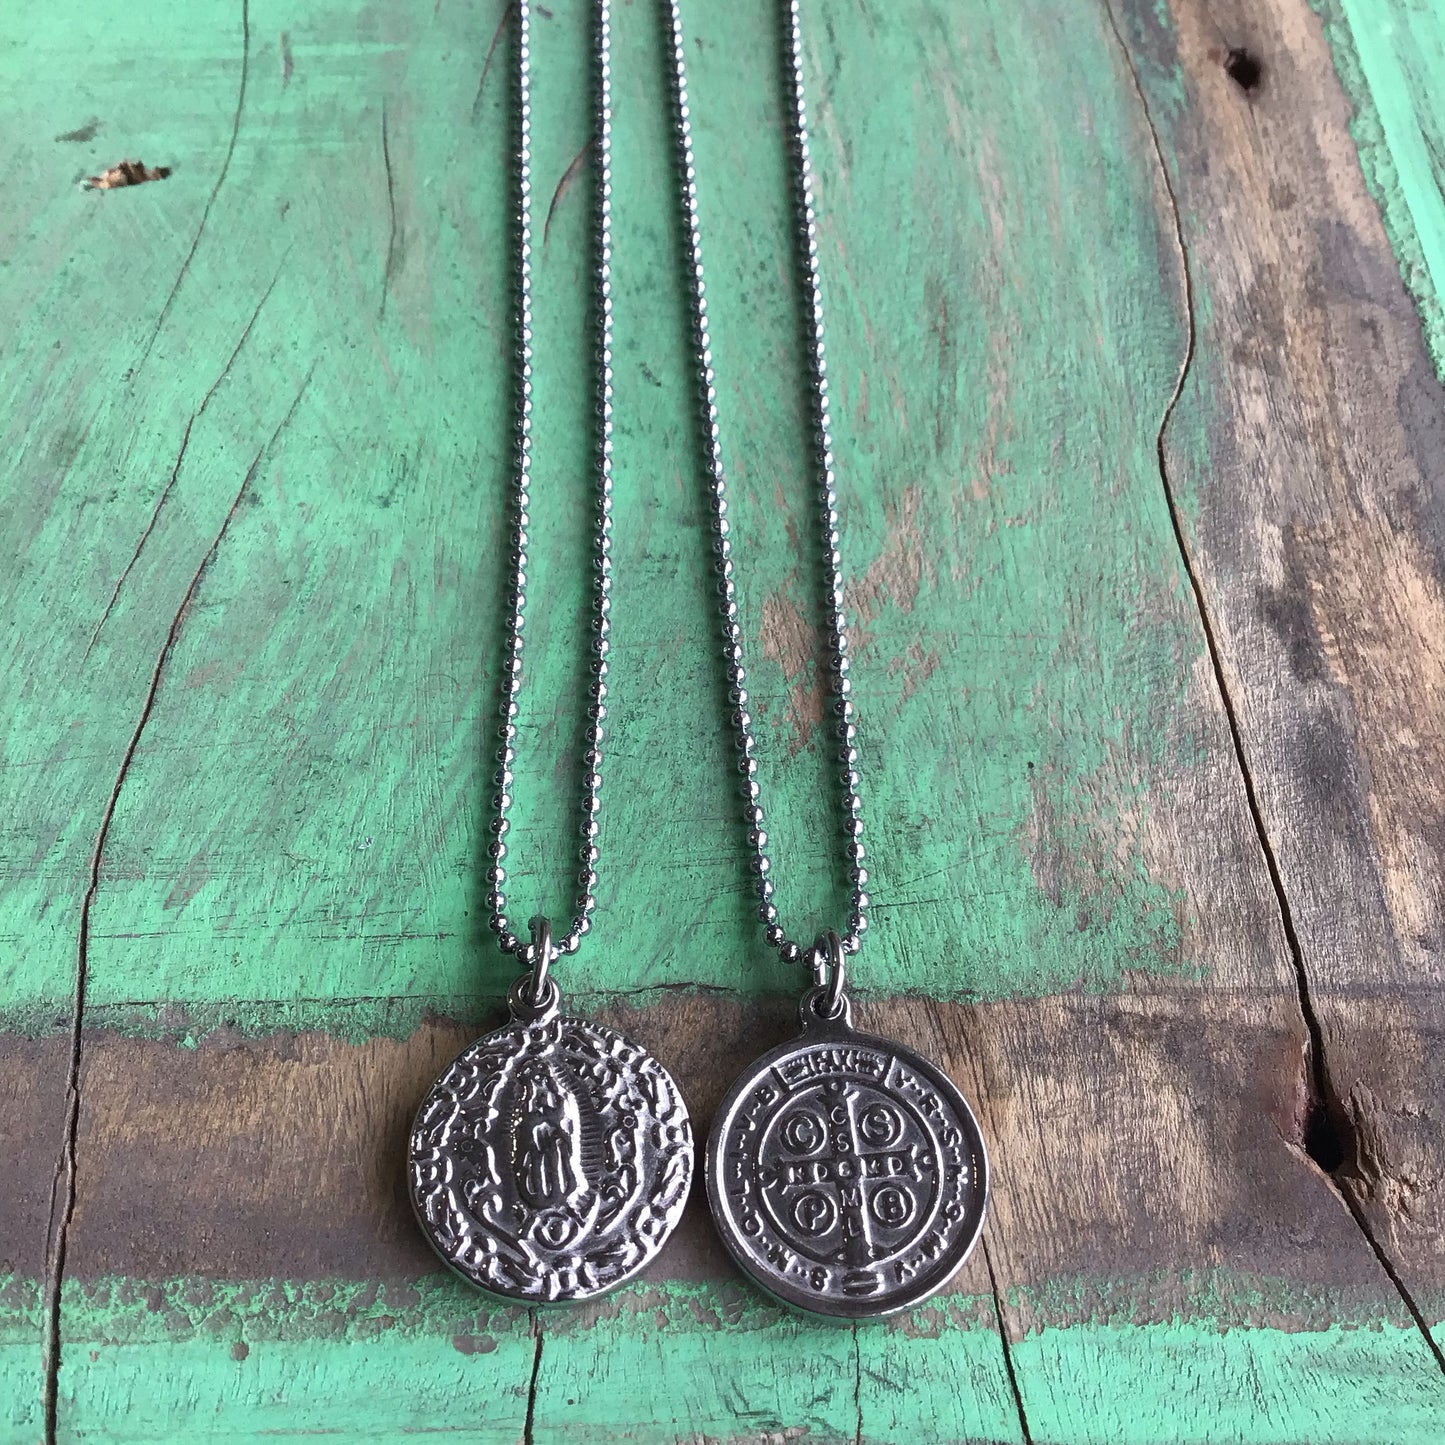 St. Benedict and OLG Necklace